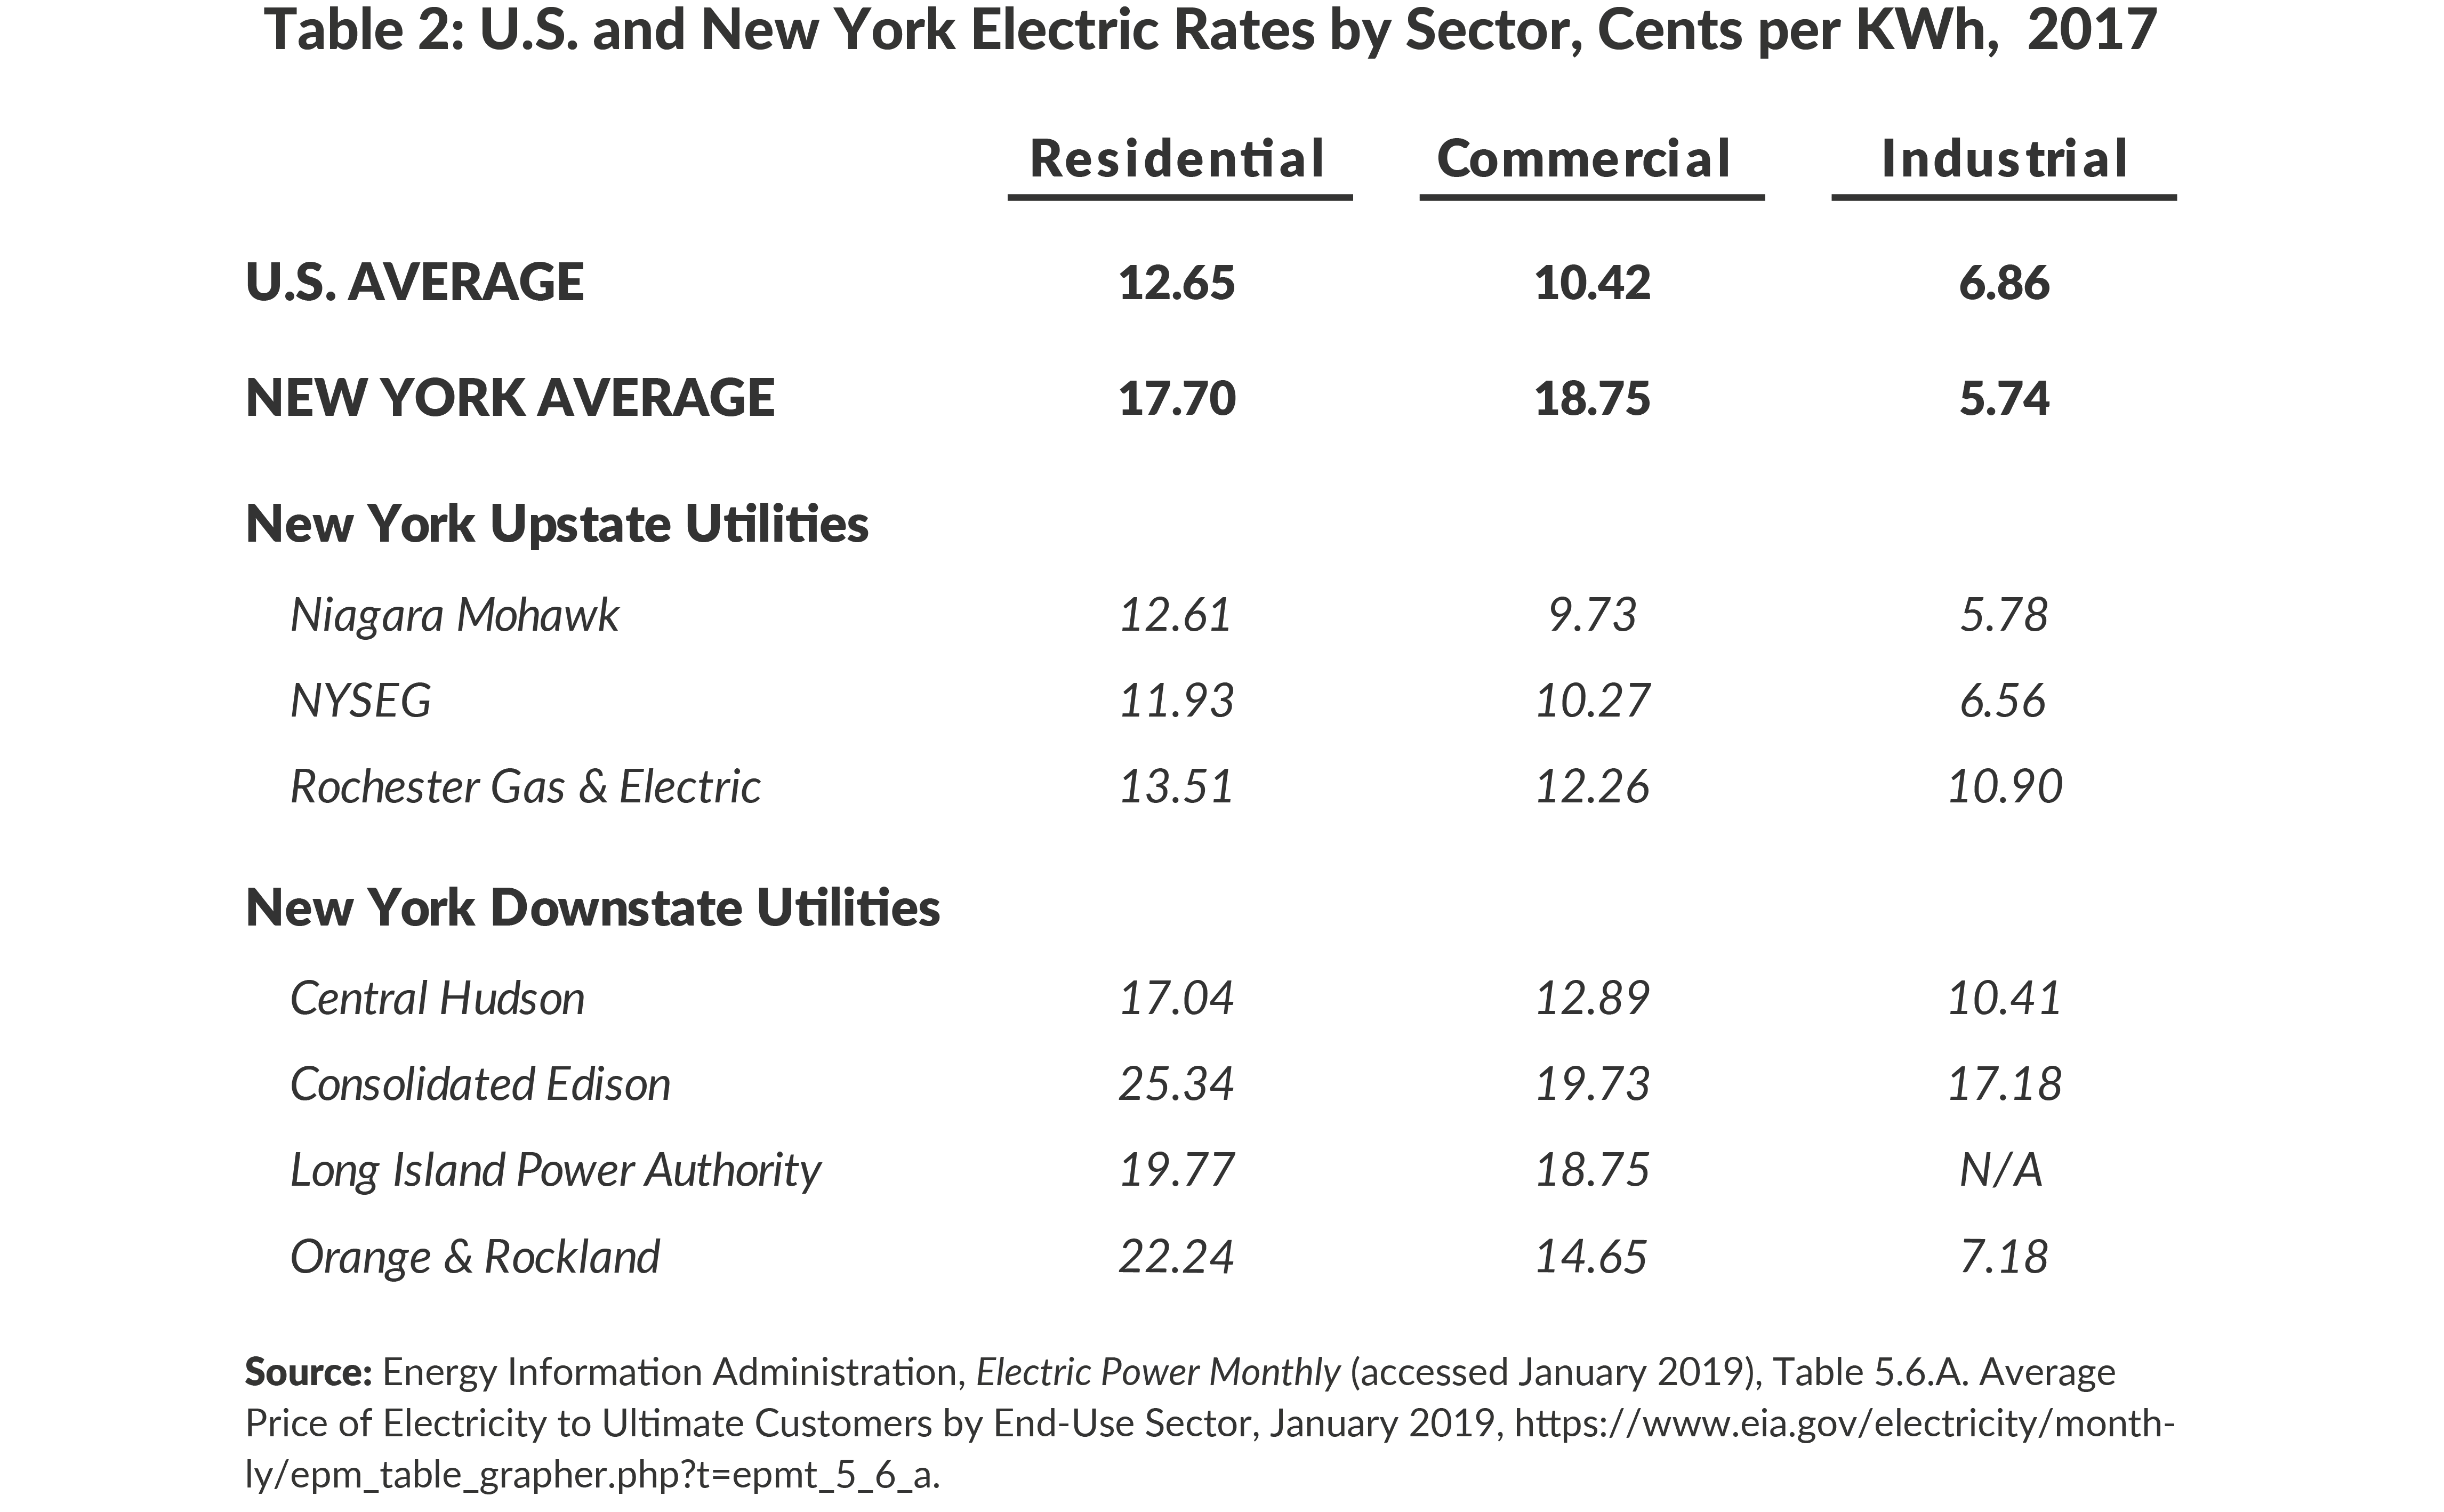 Table 2: U.S. and New York Electric Rates by Sector, Cents per KWh, 2017